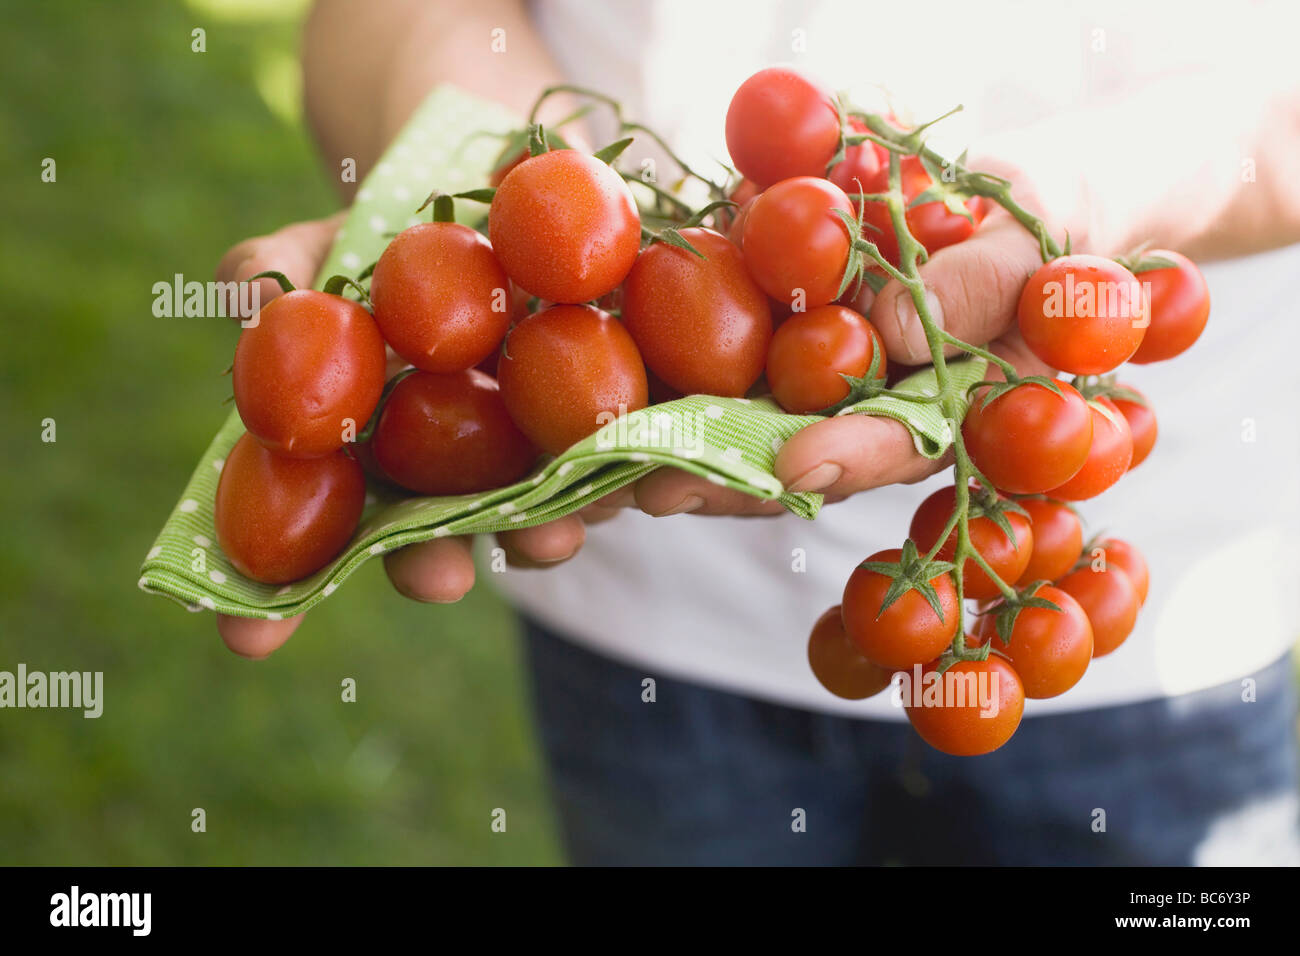 Hands holding fresh tomatoes on green cloth - Stock Photo